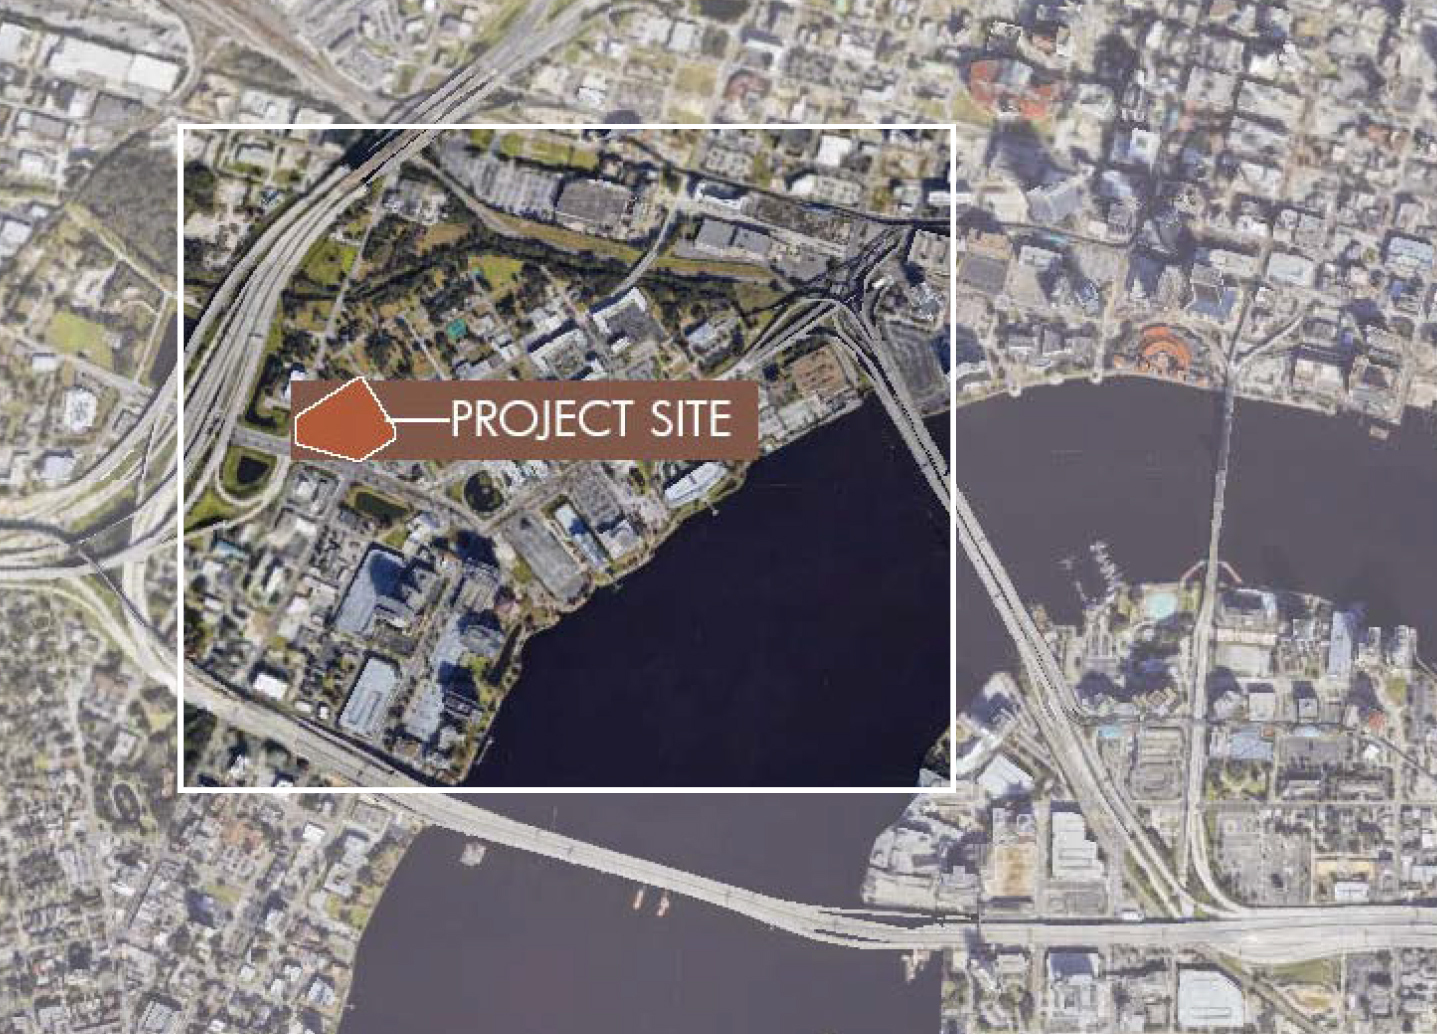 The property is in the Brooklyn neighborhood of Downtown Jacksonville.